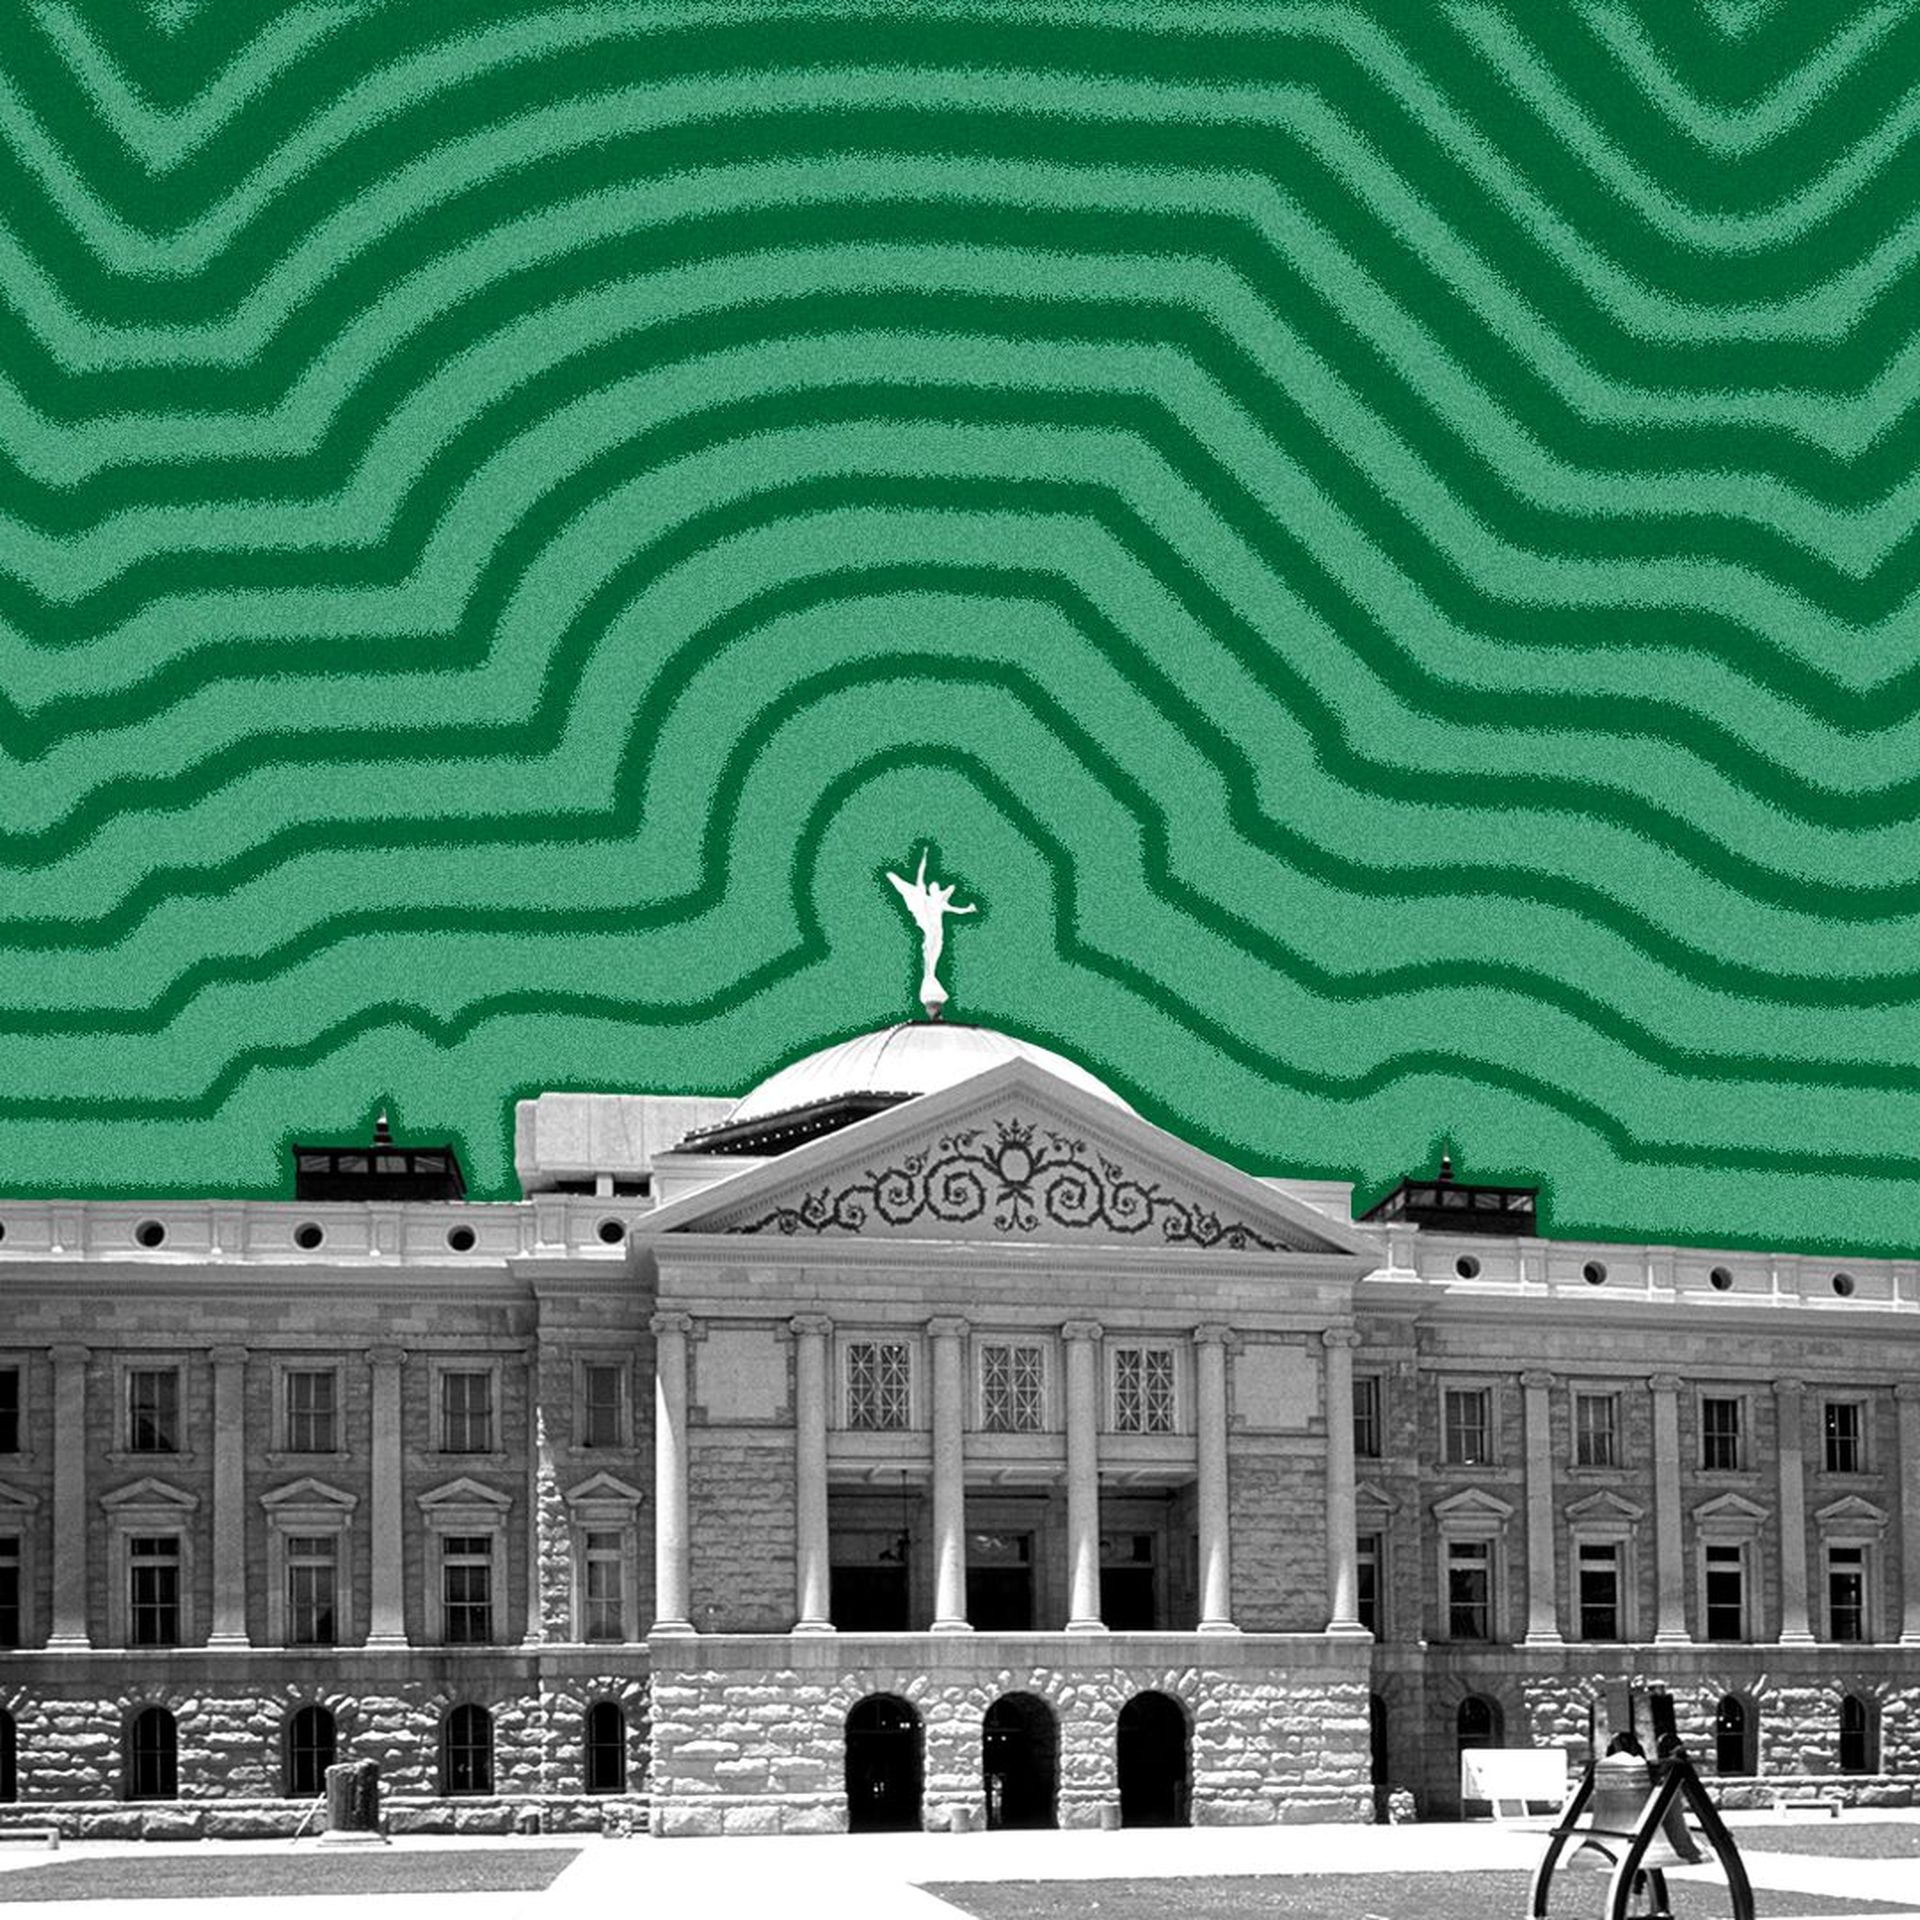 Illustration of the Arizona State Capitol with lines radiating from it.